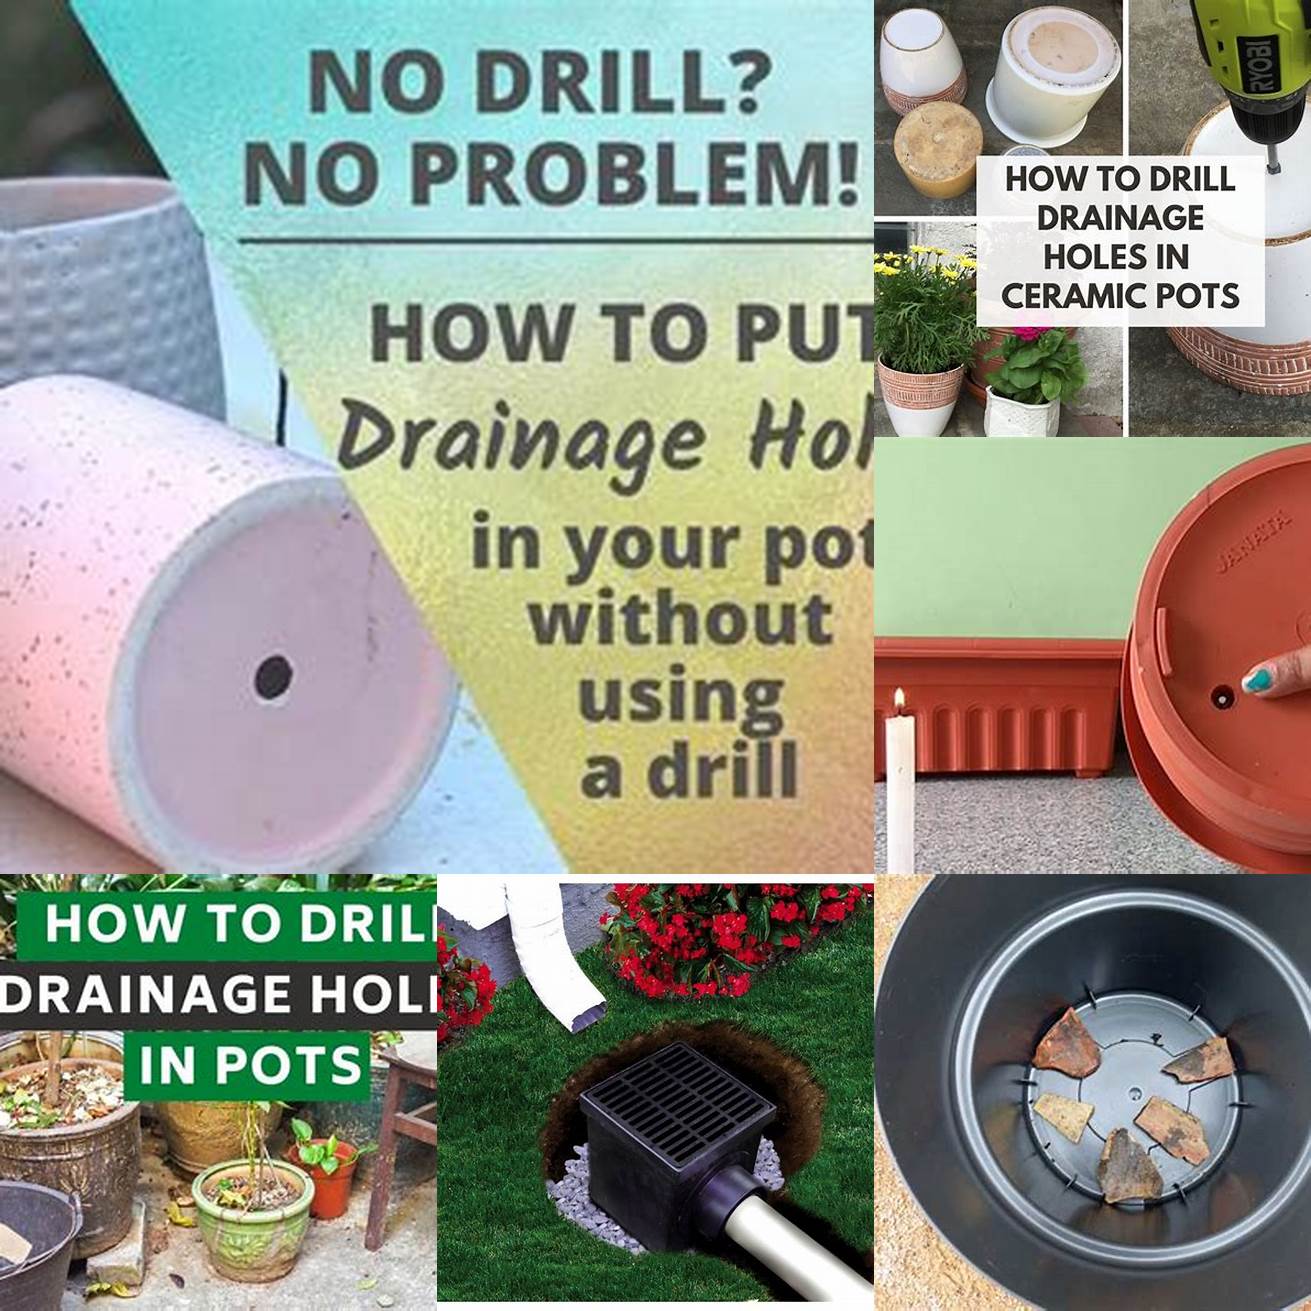 Choose containers with drainage holes